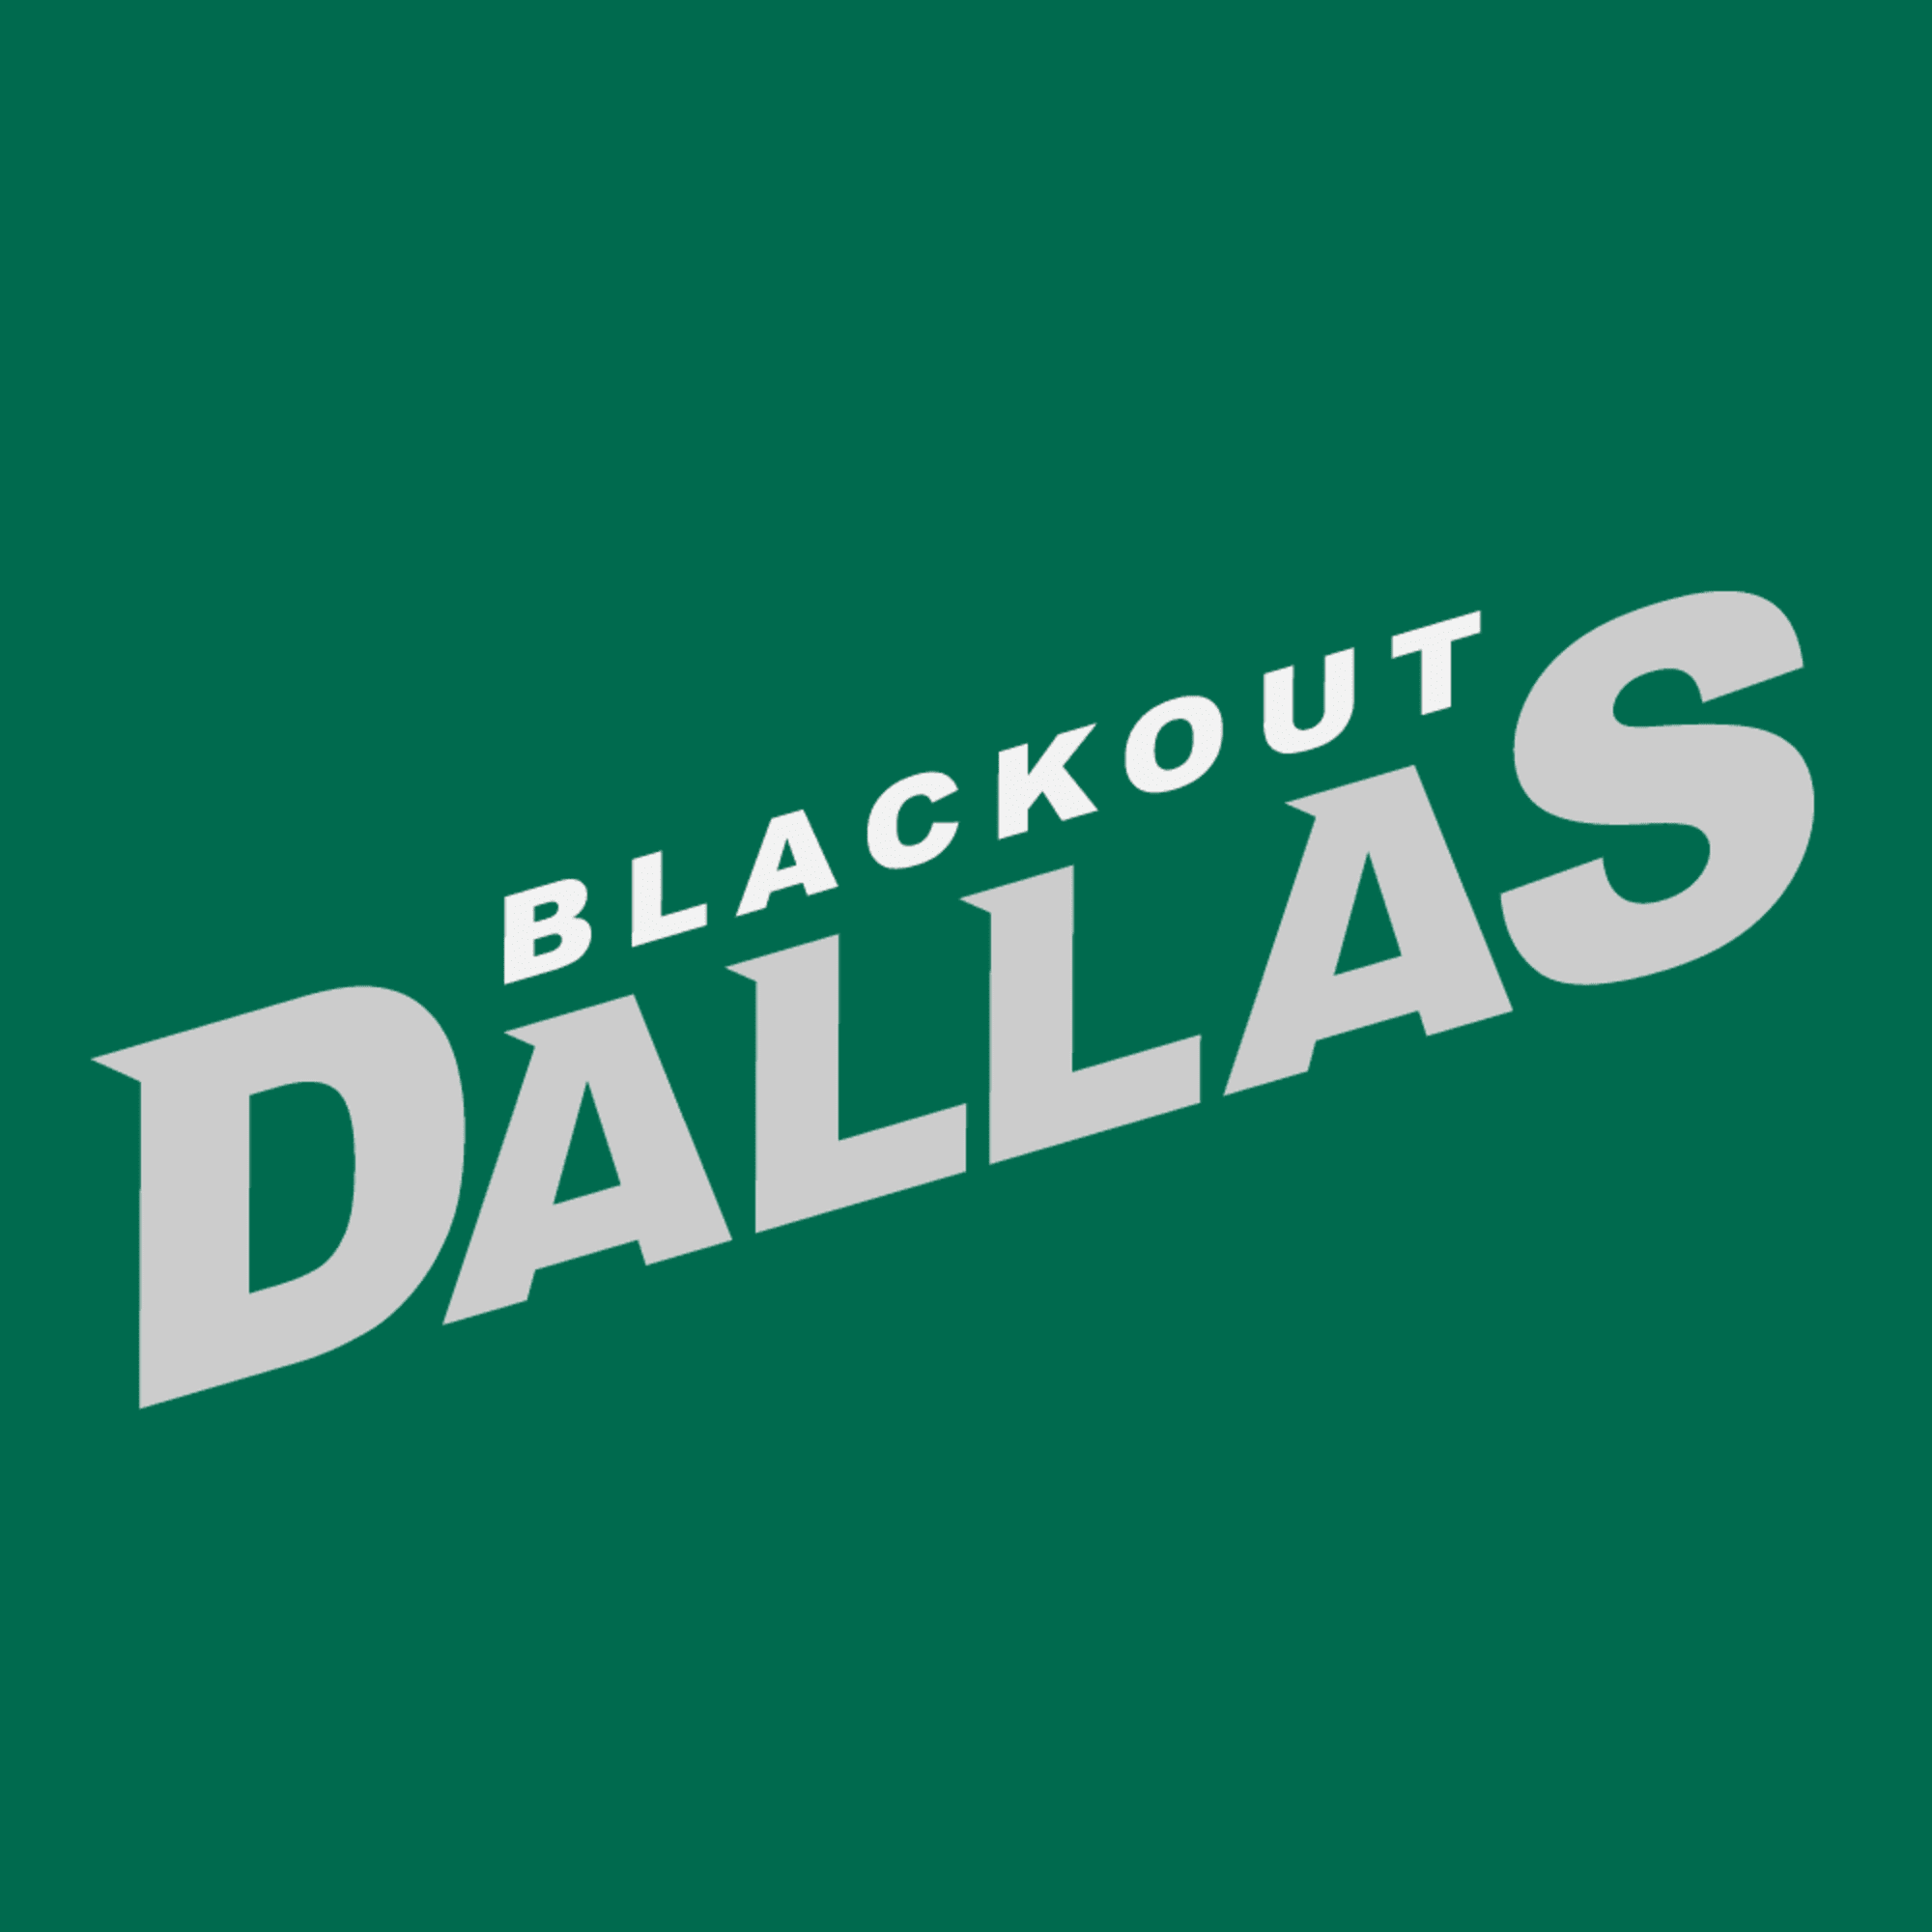 Dallas Stars to hold first annual Black History Night this weekend - CBS  Texas